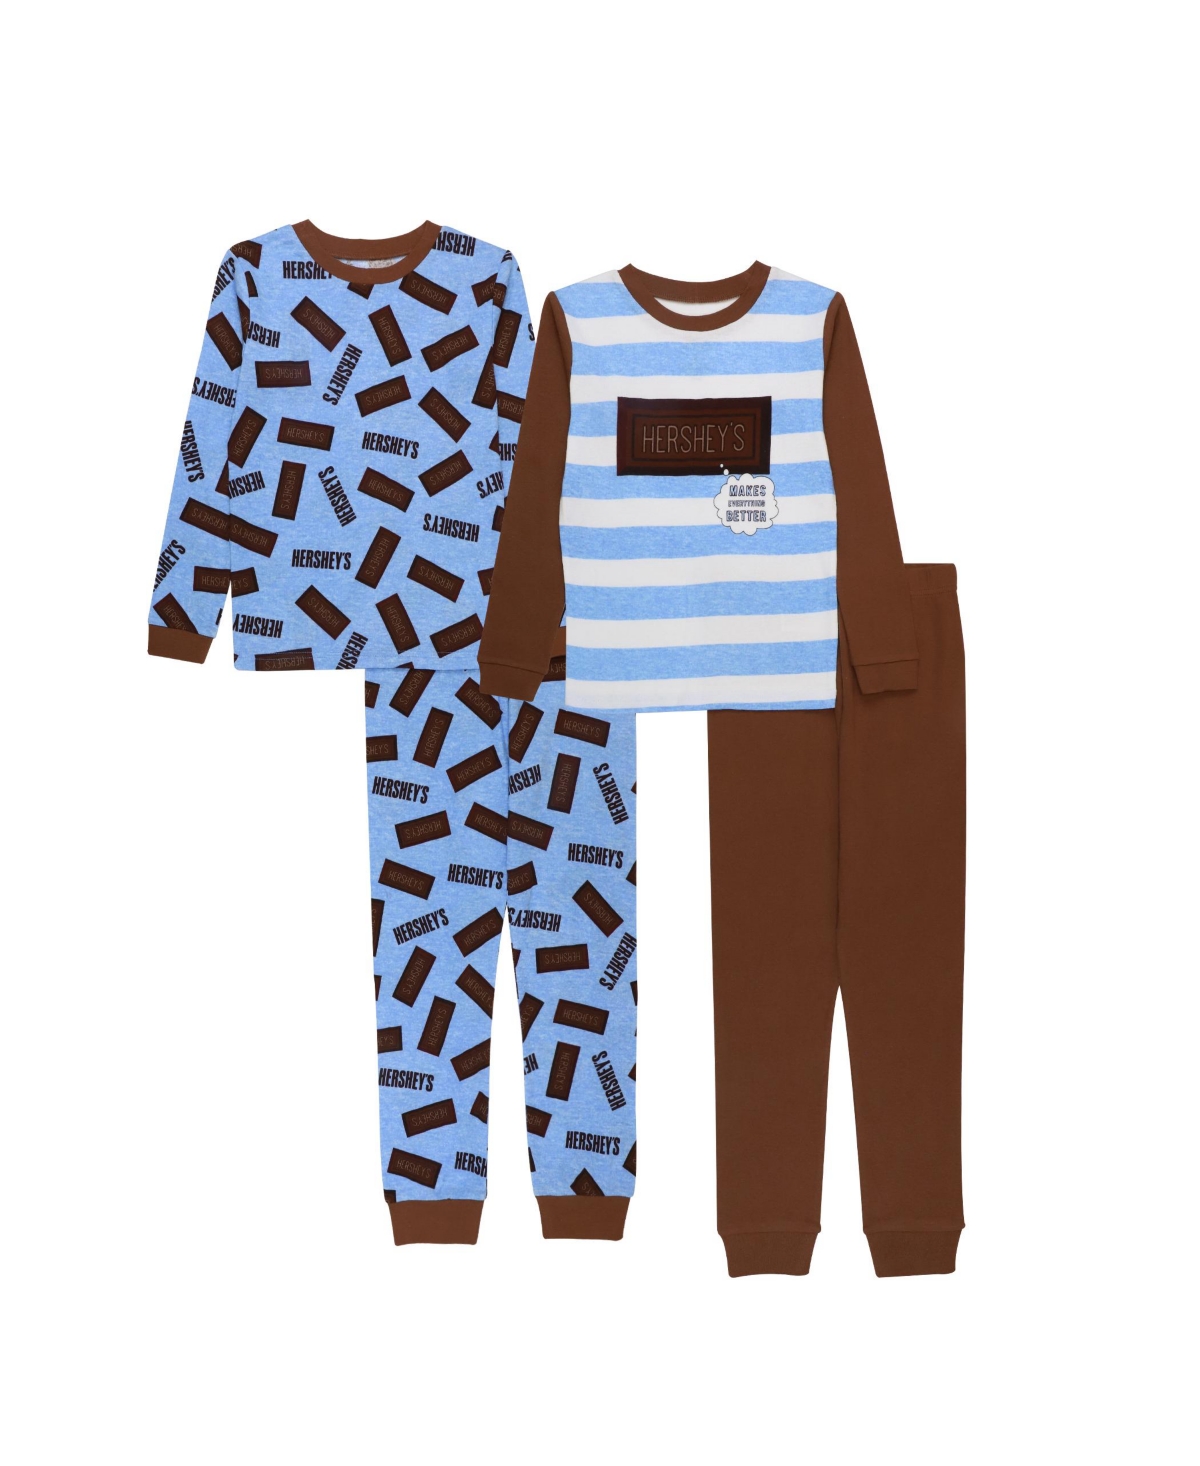 Ame Little Boys Hershey's Top And Pajama Set, 4 Piece In Multi